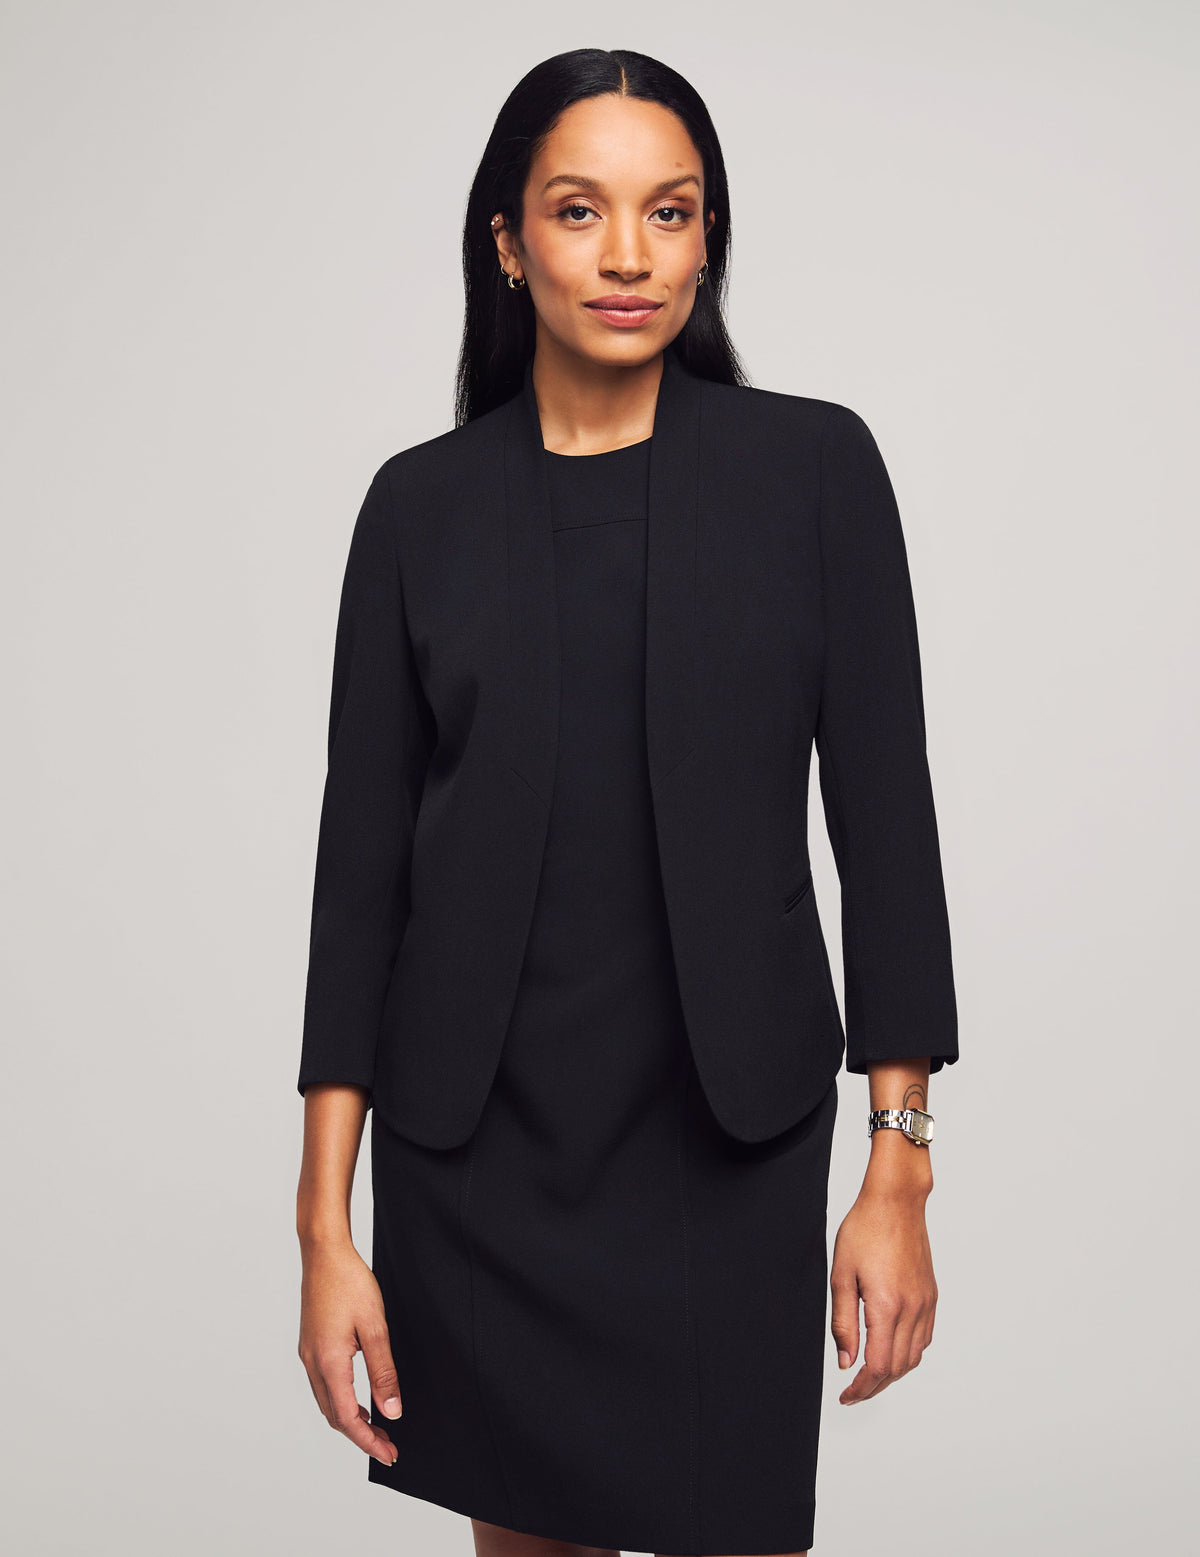 Anne Klein  Executive Collection 2-Pc. Jacket and Dress Set